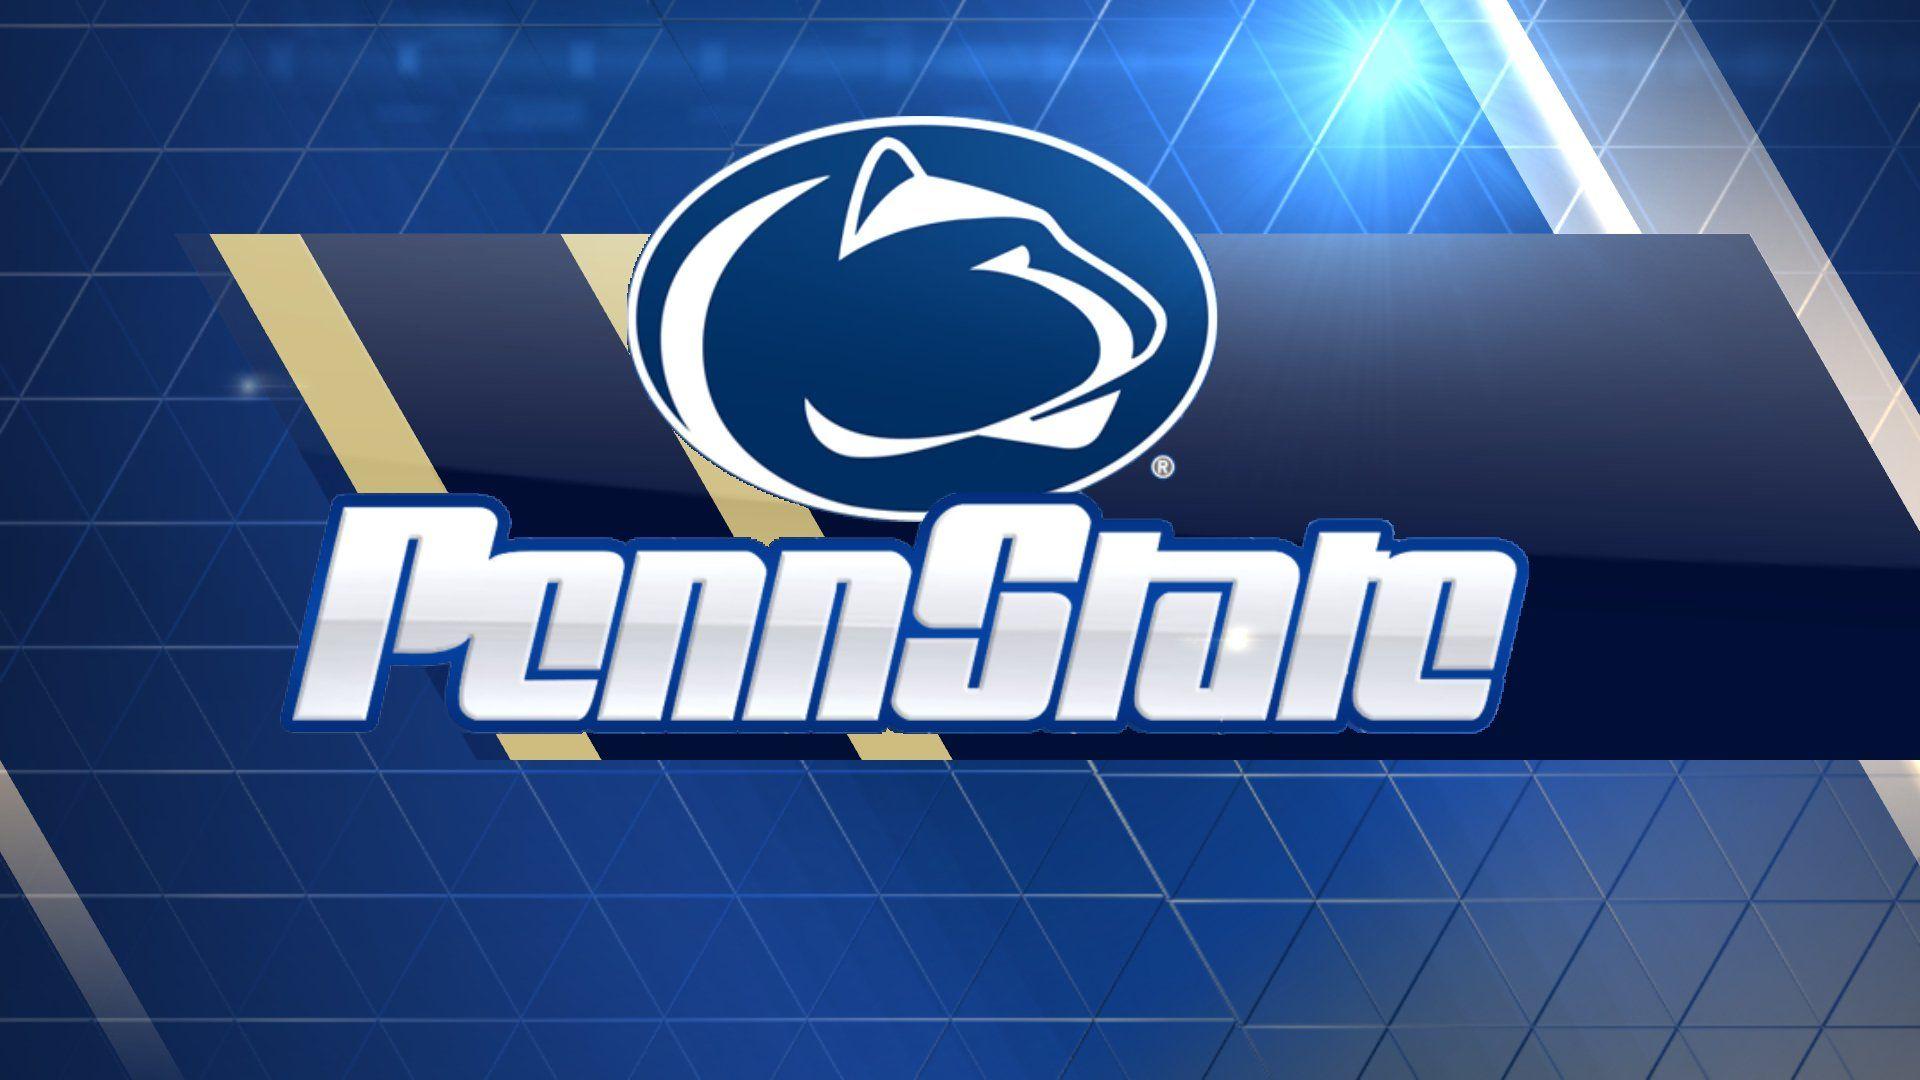 penn state nittany lions wallpapers wallpaper cave penn state nittany lions wallpapers